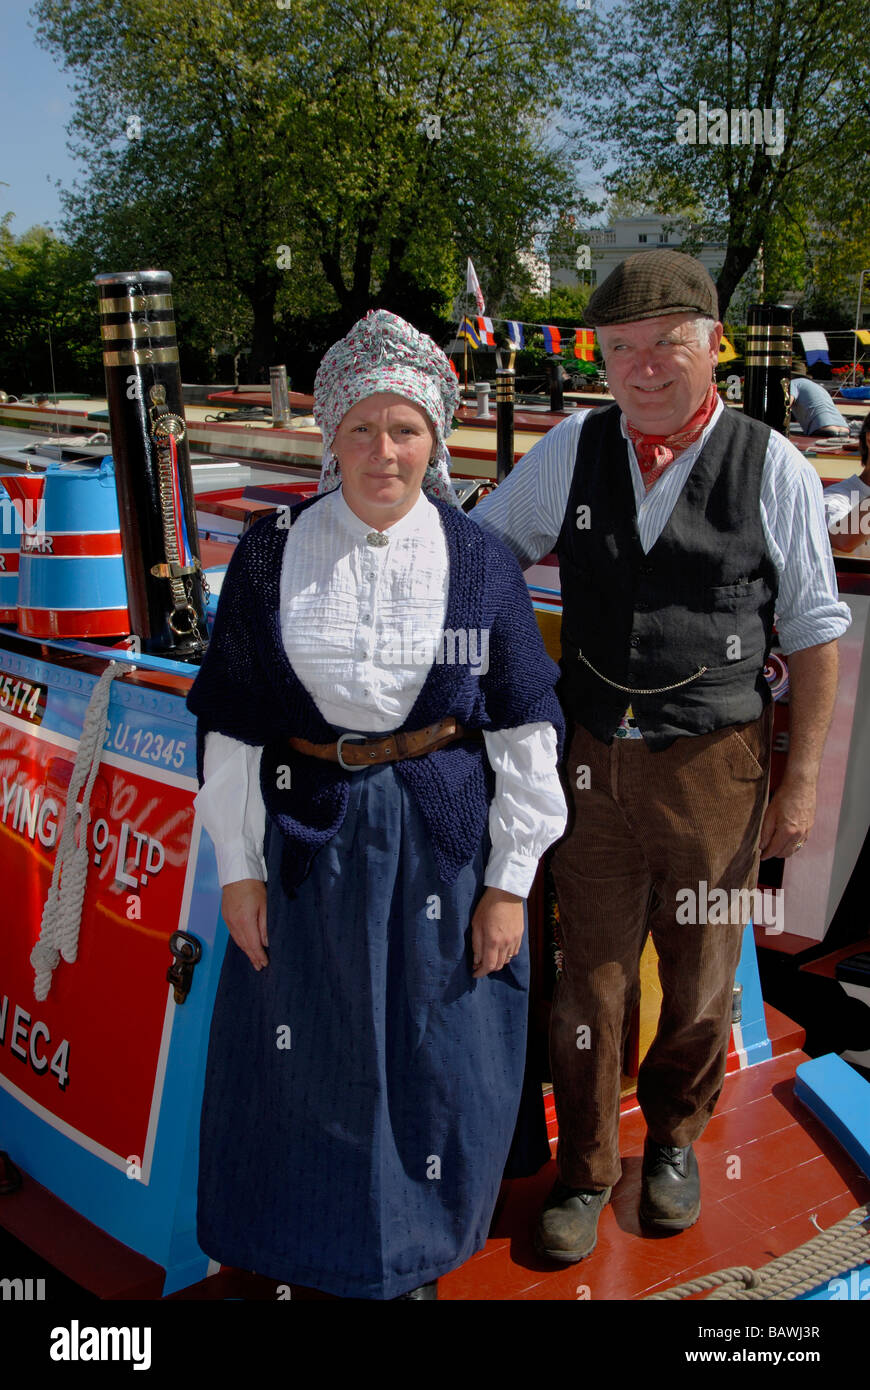 Man and woman in traditional Victorian narrowboat costume standing on the stern of their working narrowboat, London, England Stock Photo